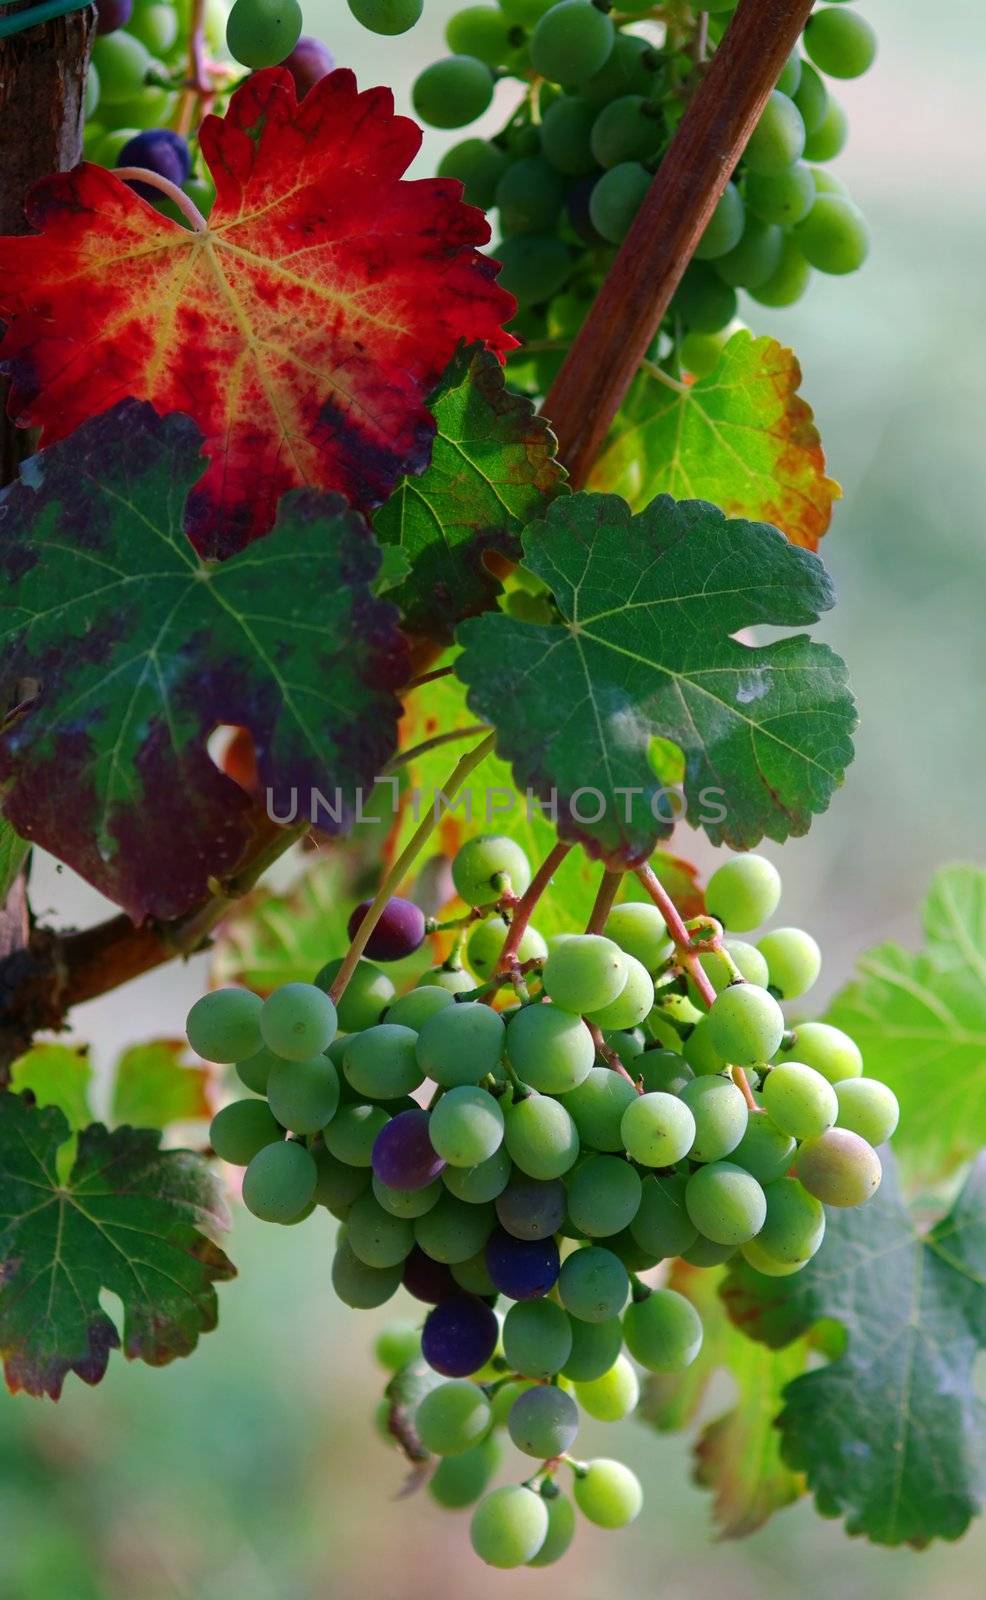 Bunch of grapes by baggiovara